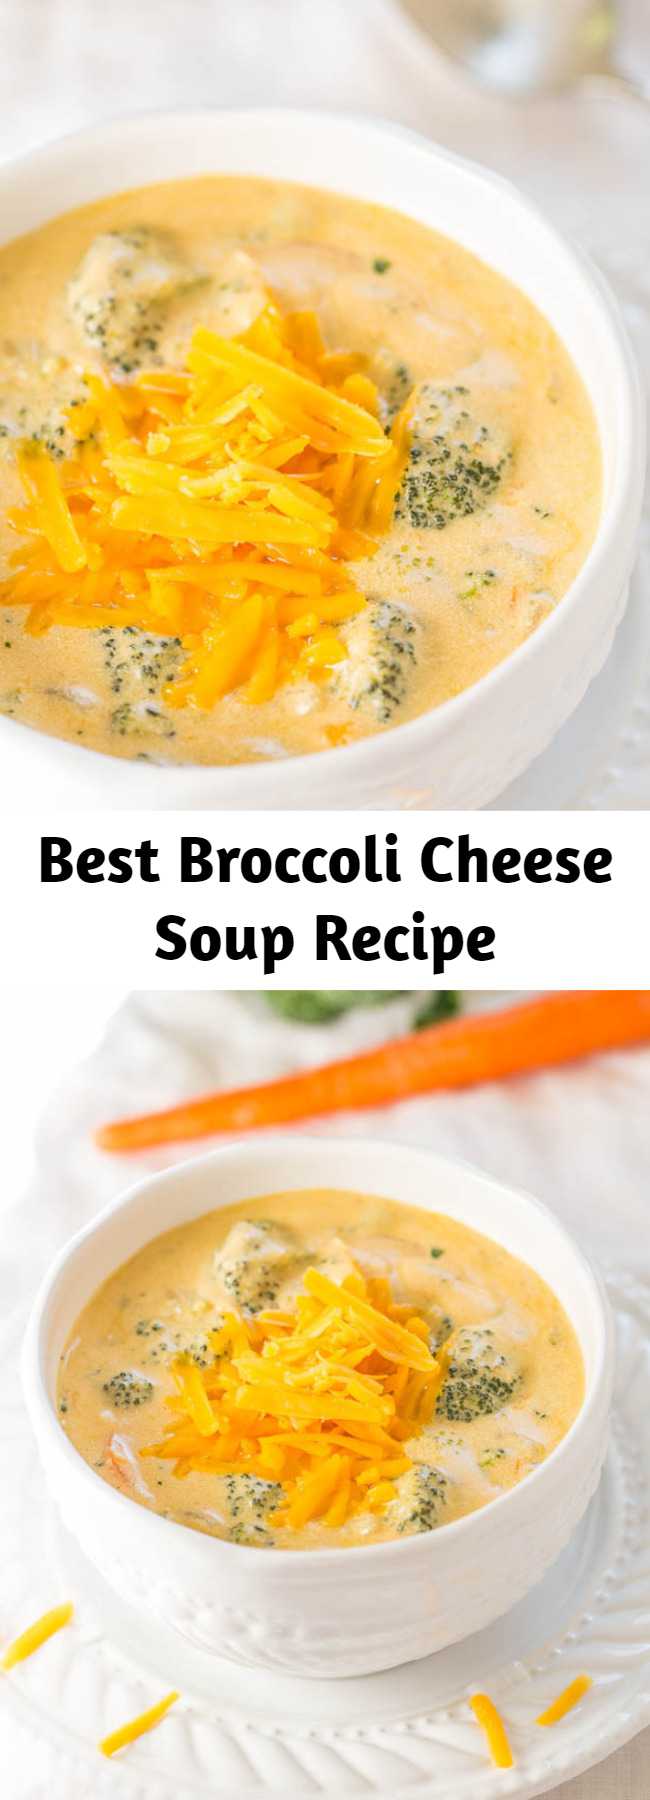 The Best Broccoli Cheese Soup Recipe (Better-Than-Panera Copycat. This is the best broccoli cheese soup. Not only that, it’s some of the best soup I’ve ever tasted, period. If you like Panera’s broccoli cheddar soup, this blows the pants off it. It’s an easy soup to make and is ready in 1 hour. You’ll be rewarded with the best, creamiest, richest, and most amazing soup.